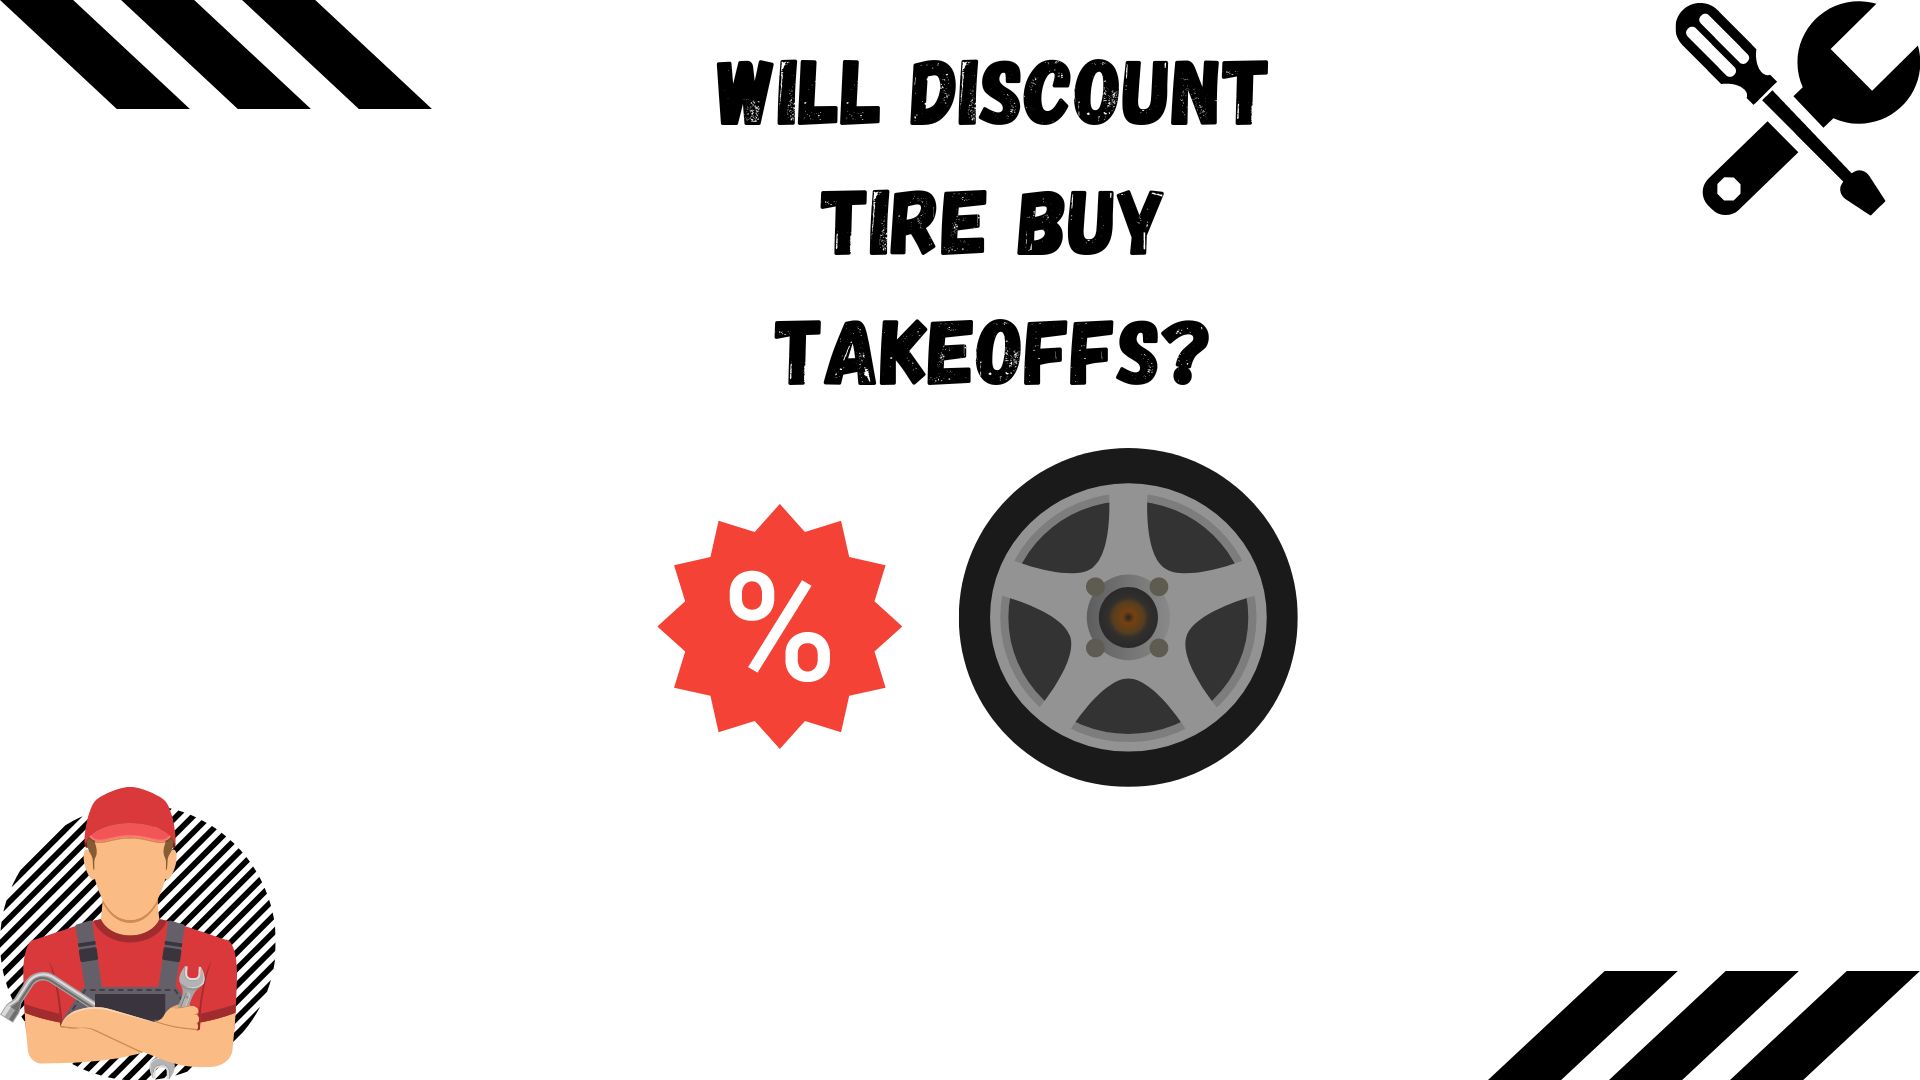 Will Discount Tire Buy Takeoffs